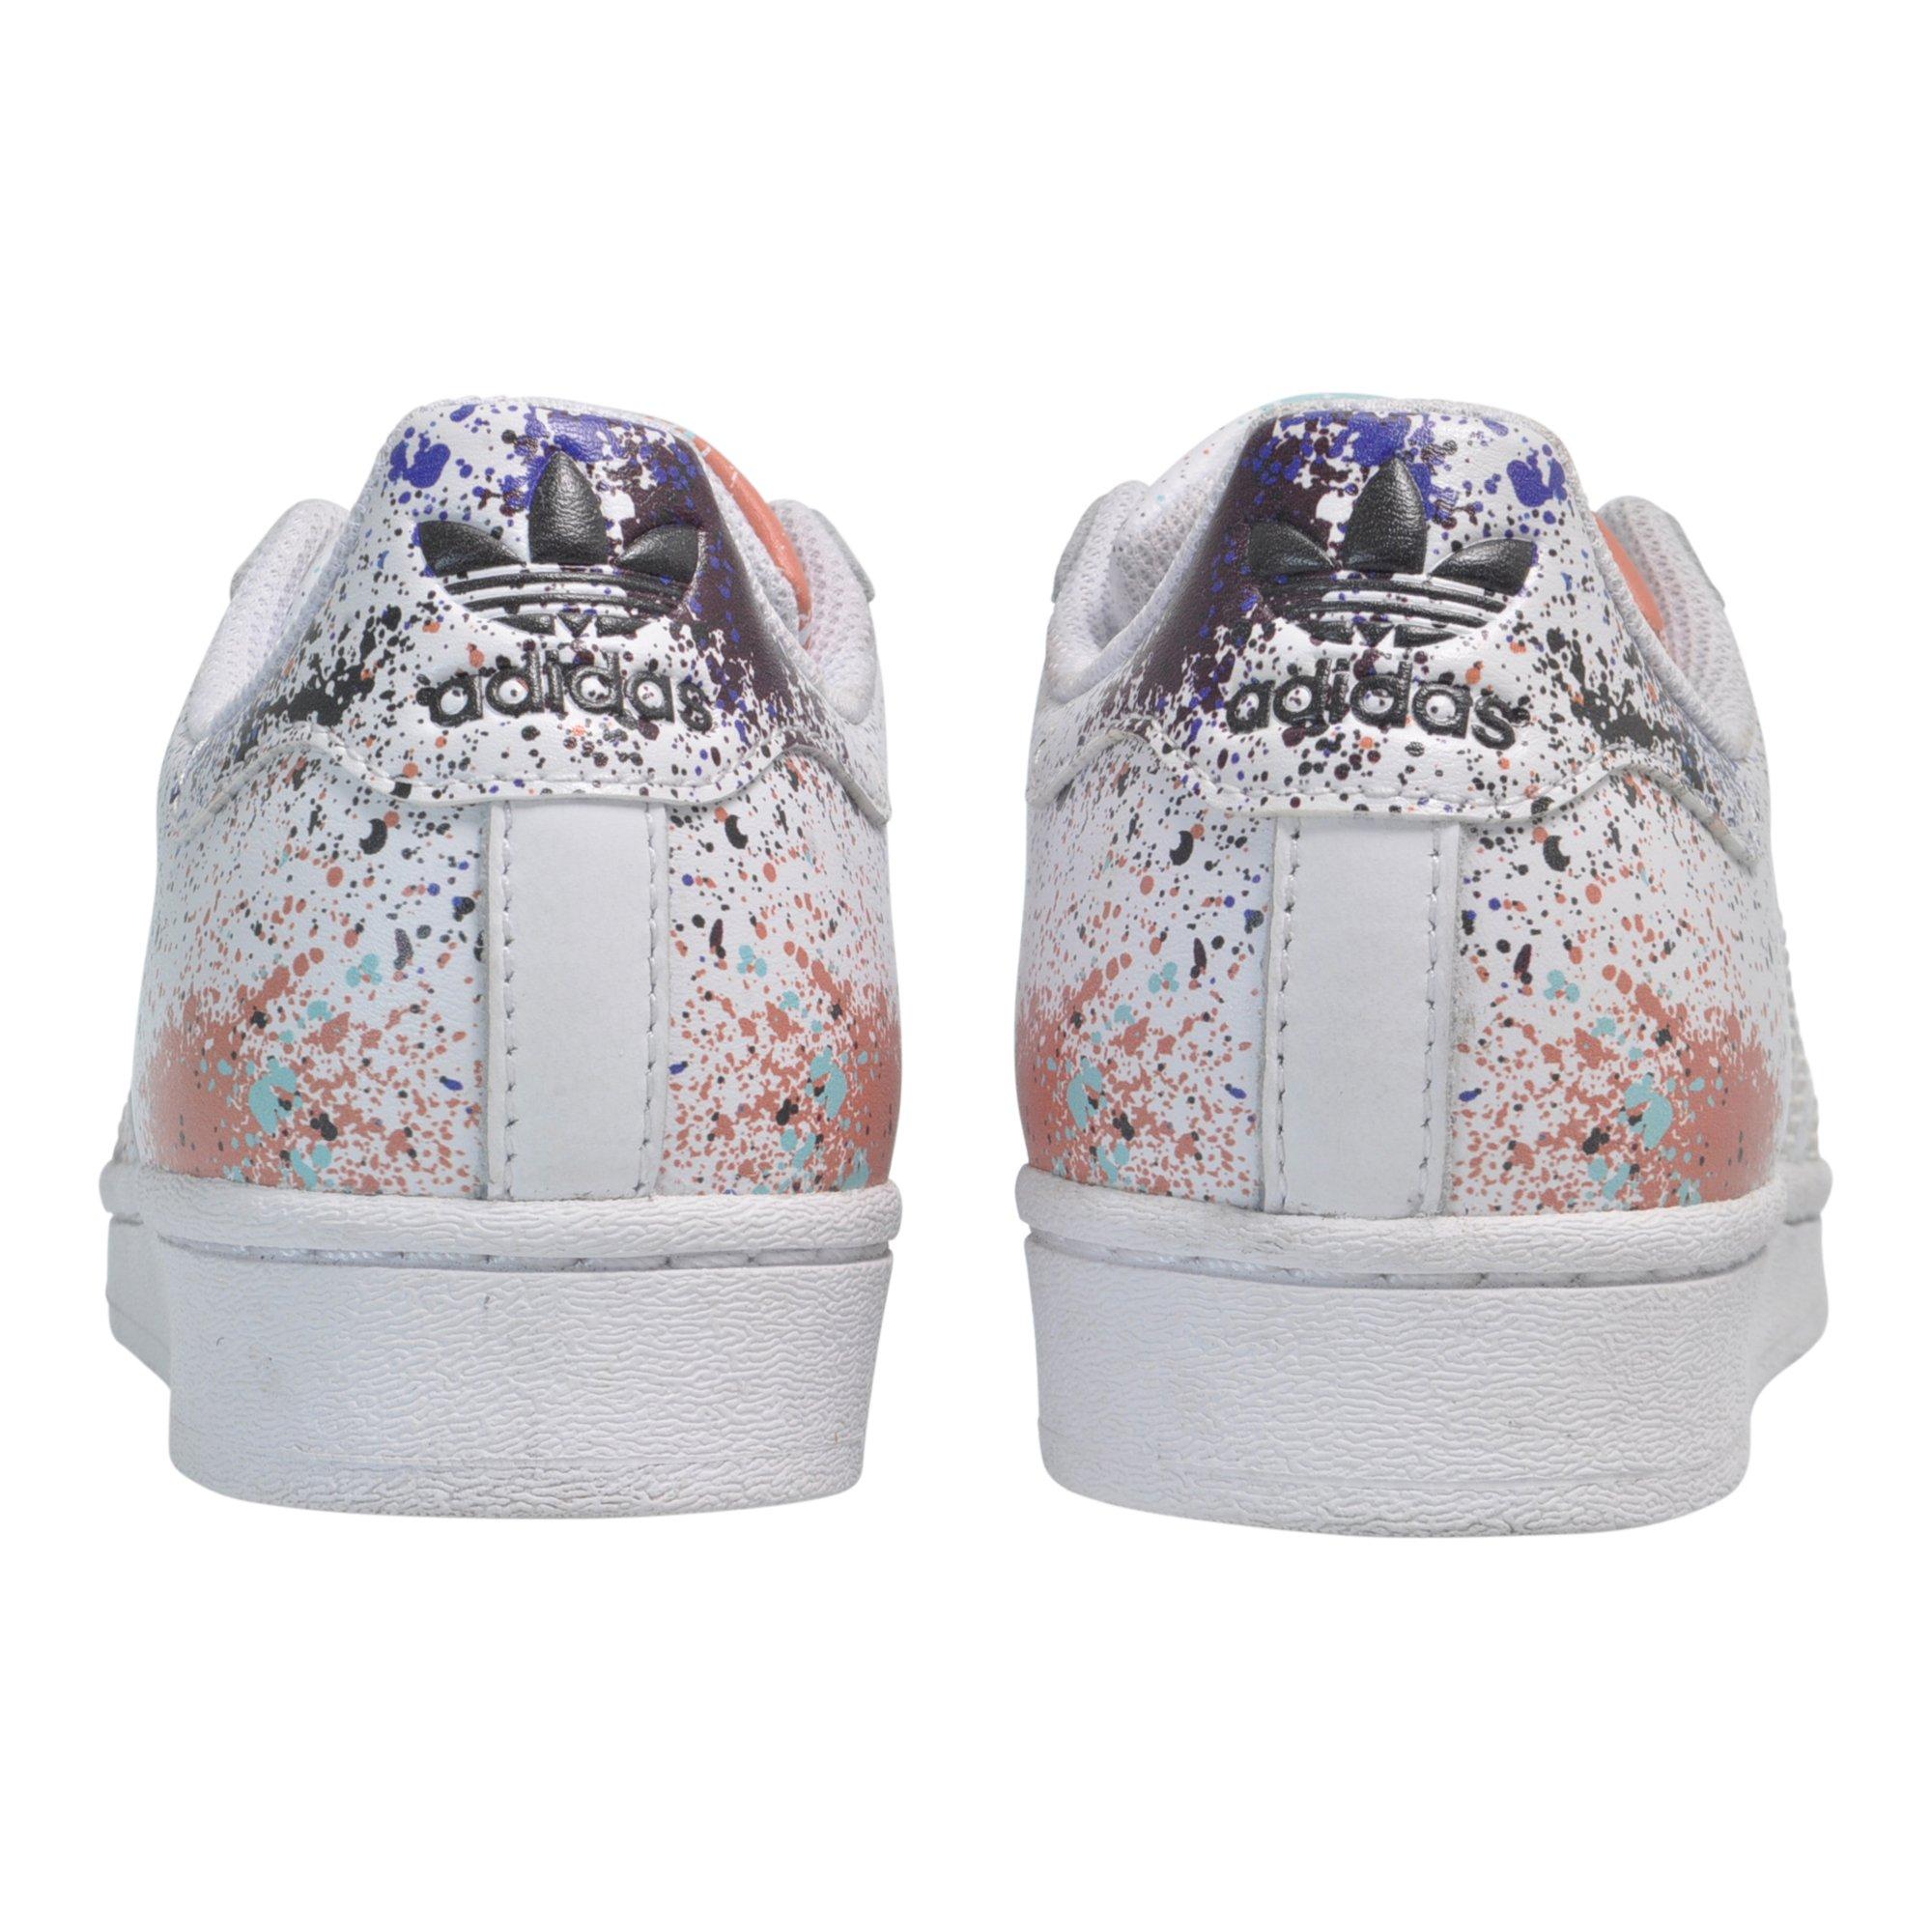 Women's Adidas Superstar  Custom shoes diy, Adidas painted shoes